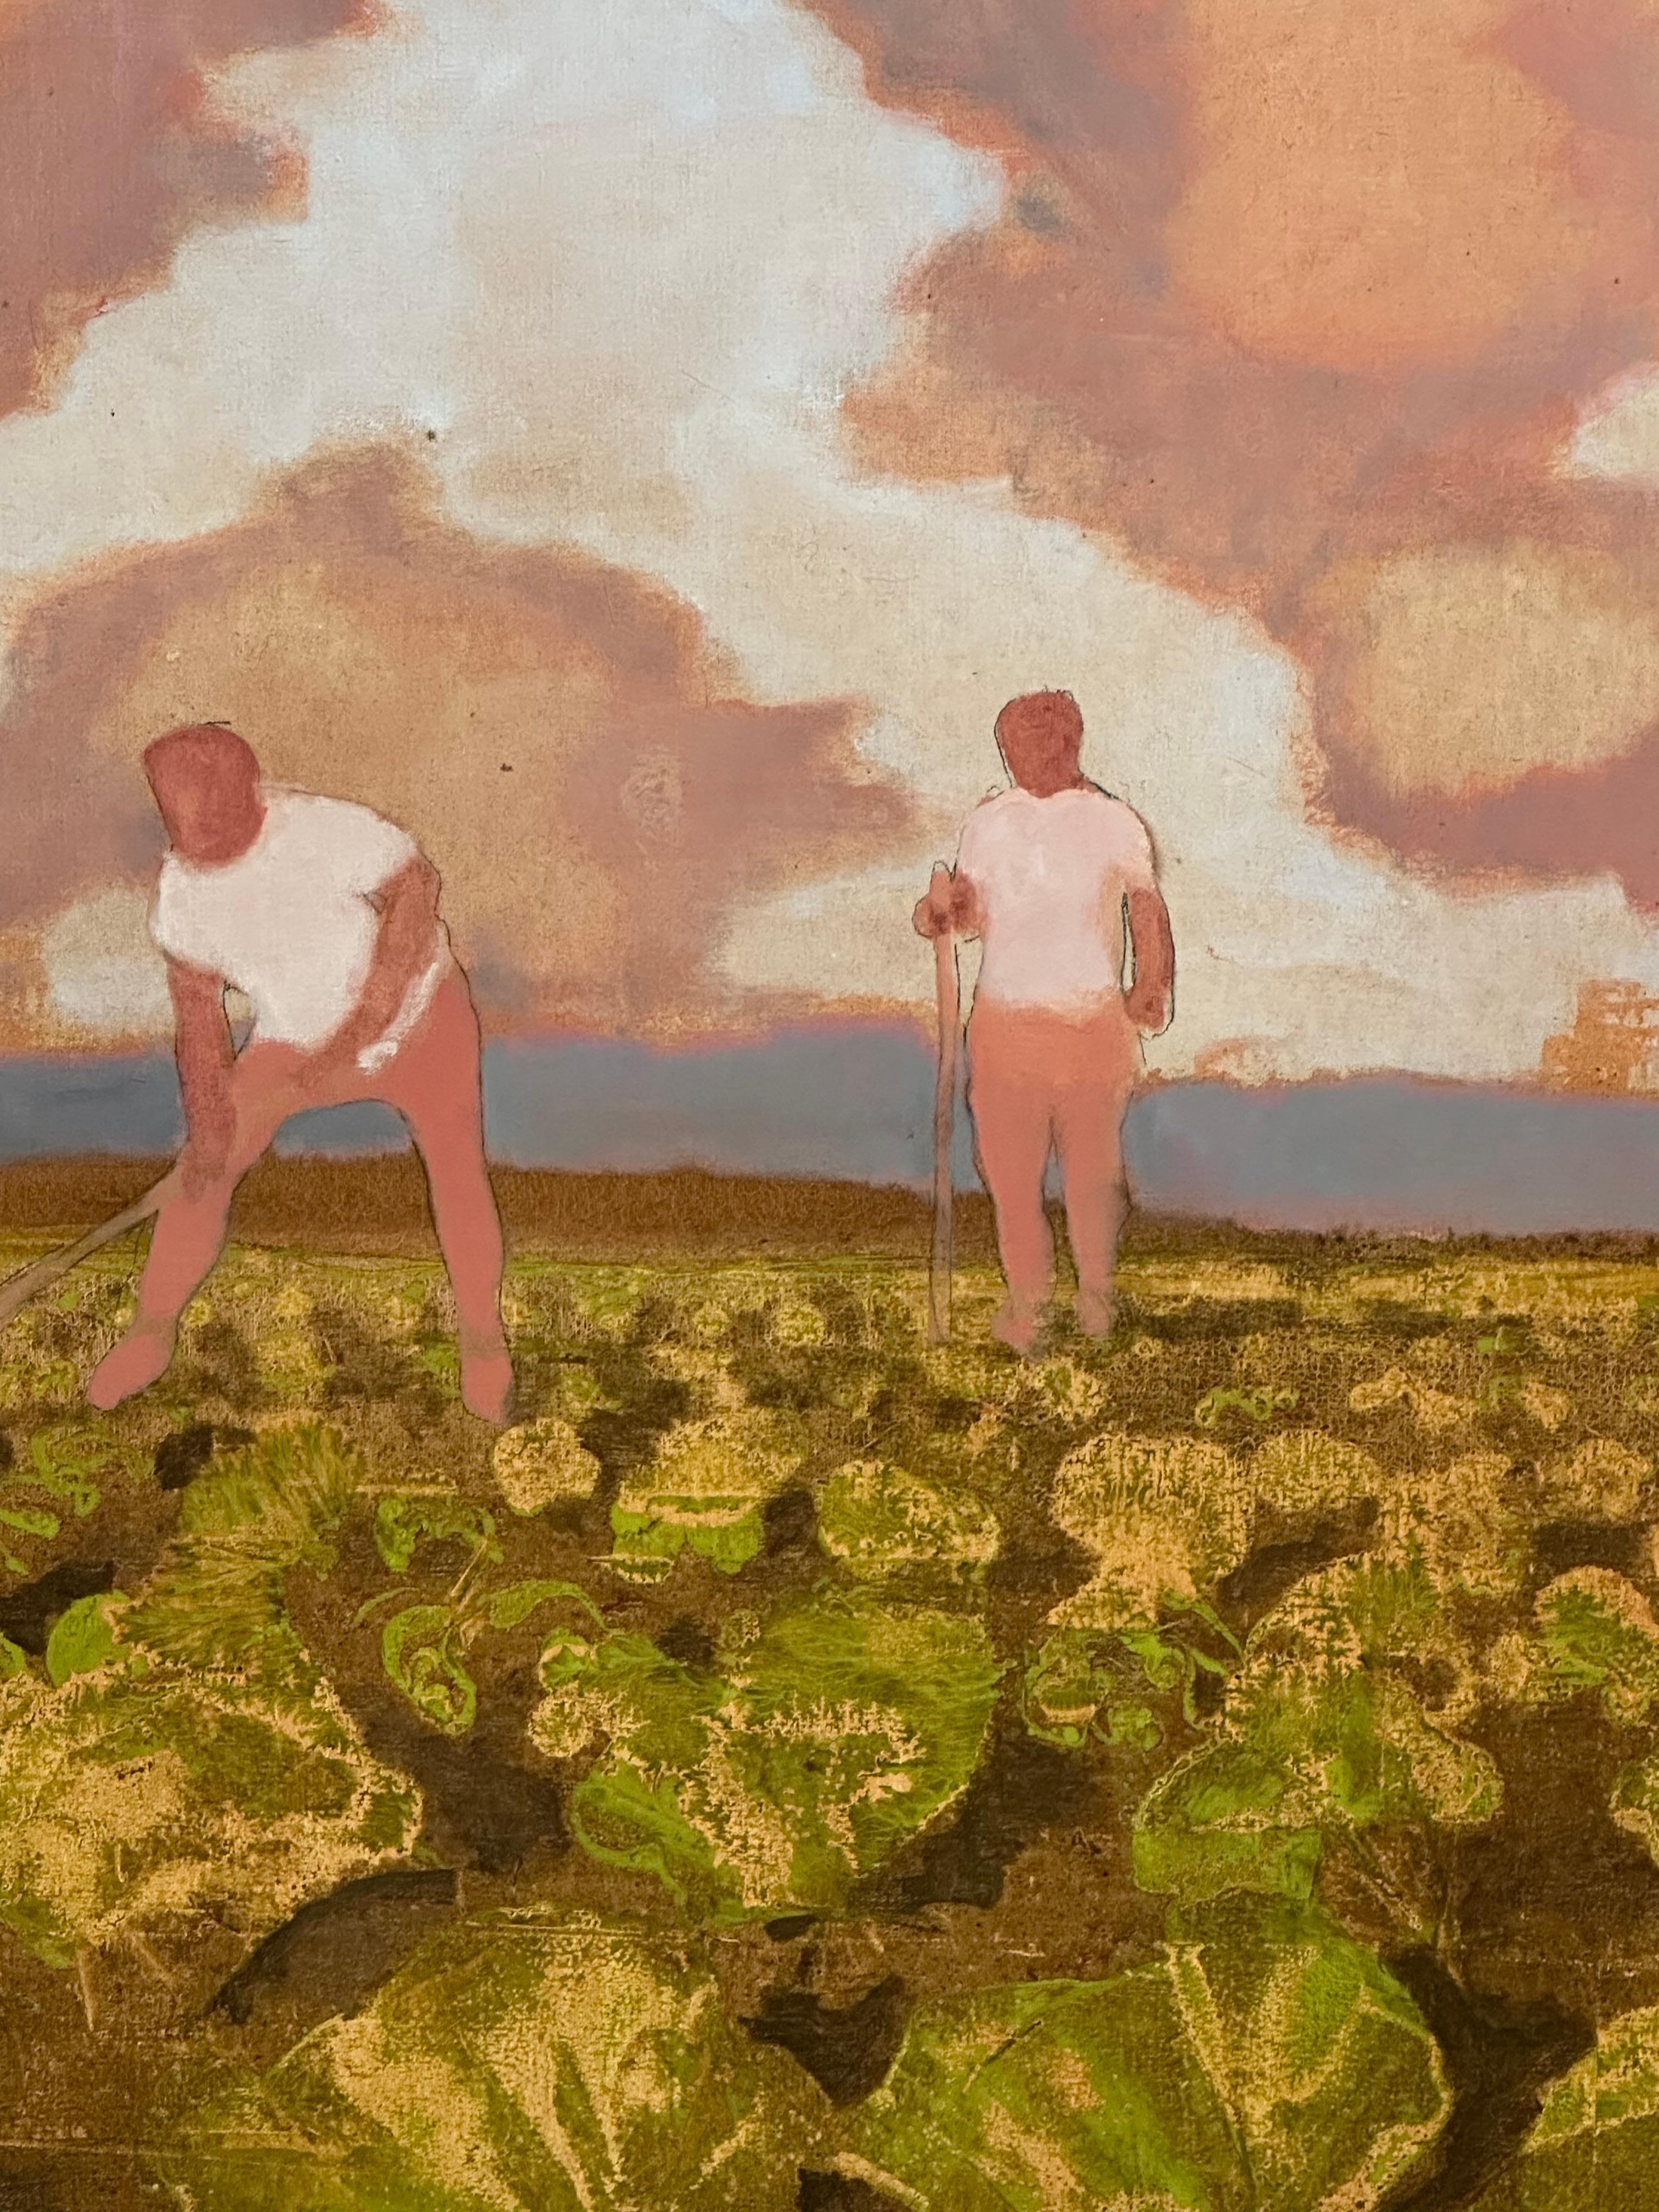 Cabbage Field, Farmers in Green and Ochre Vegetable Field, Gray, Salmon Pink Sky - Contemporary Painting by David Konigsberg